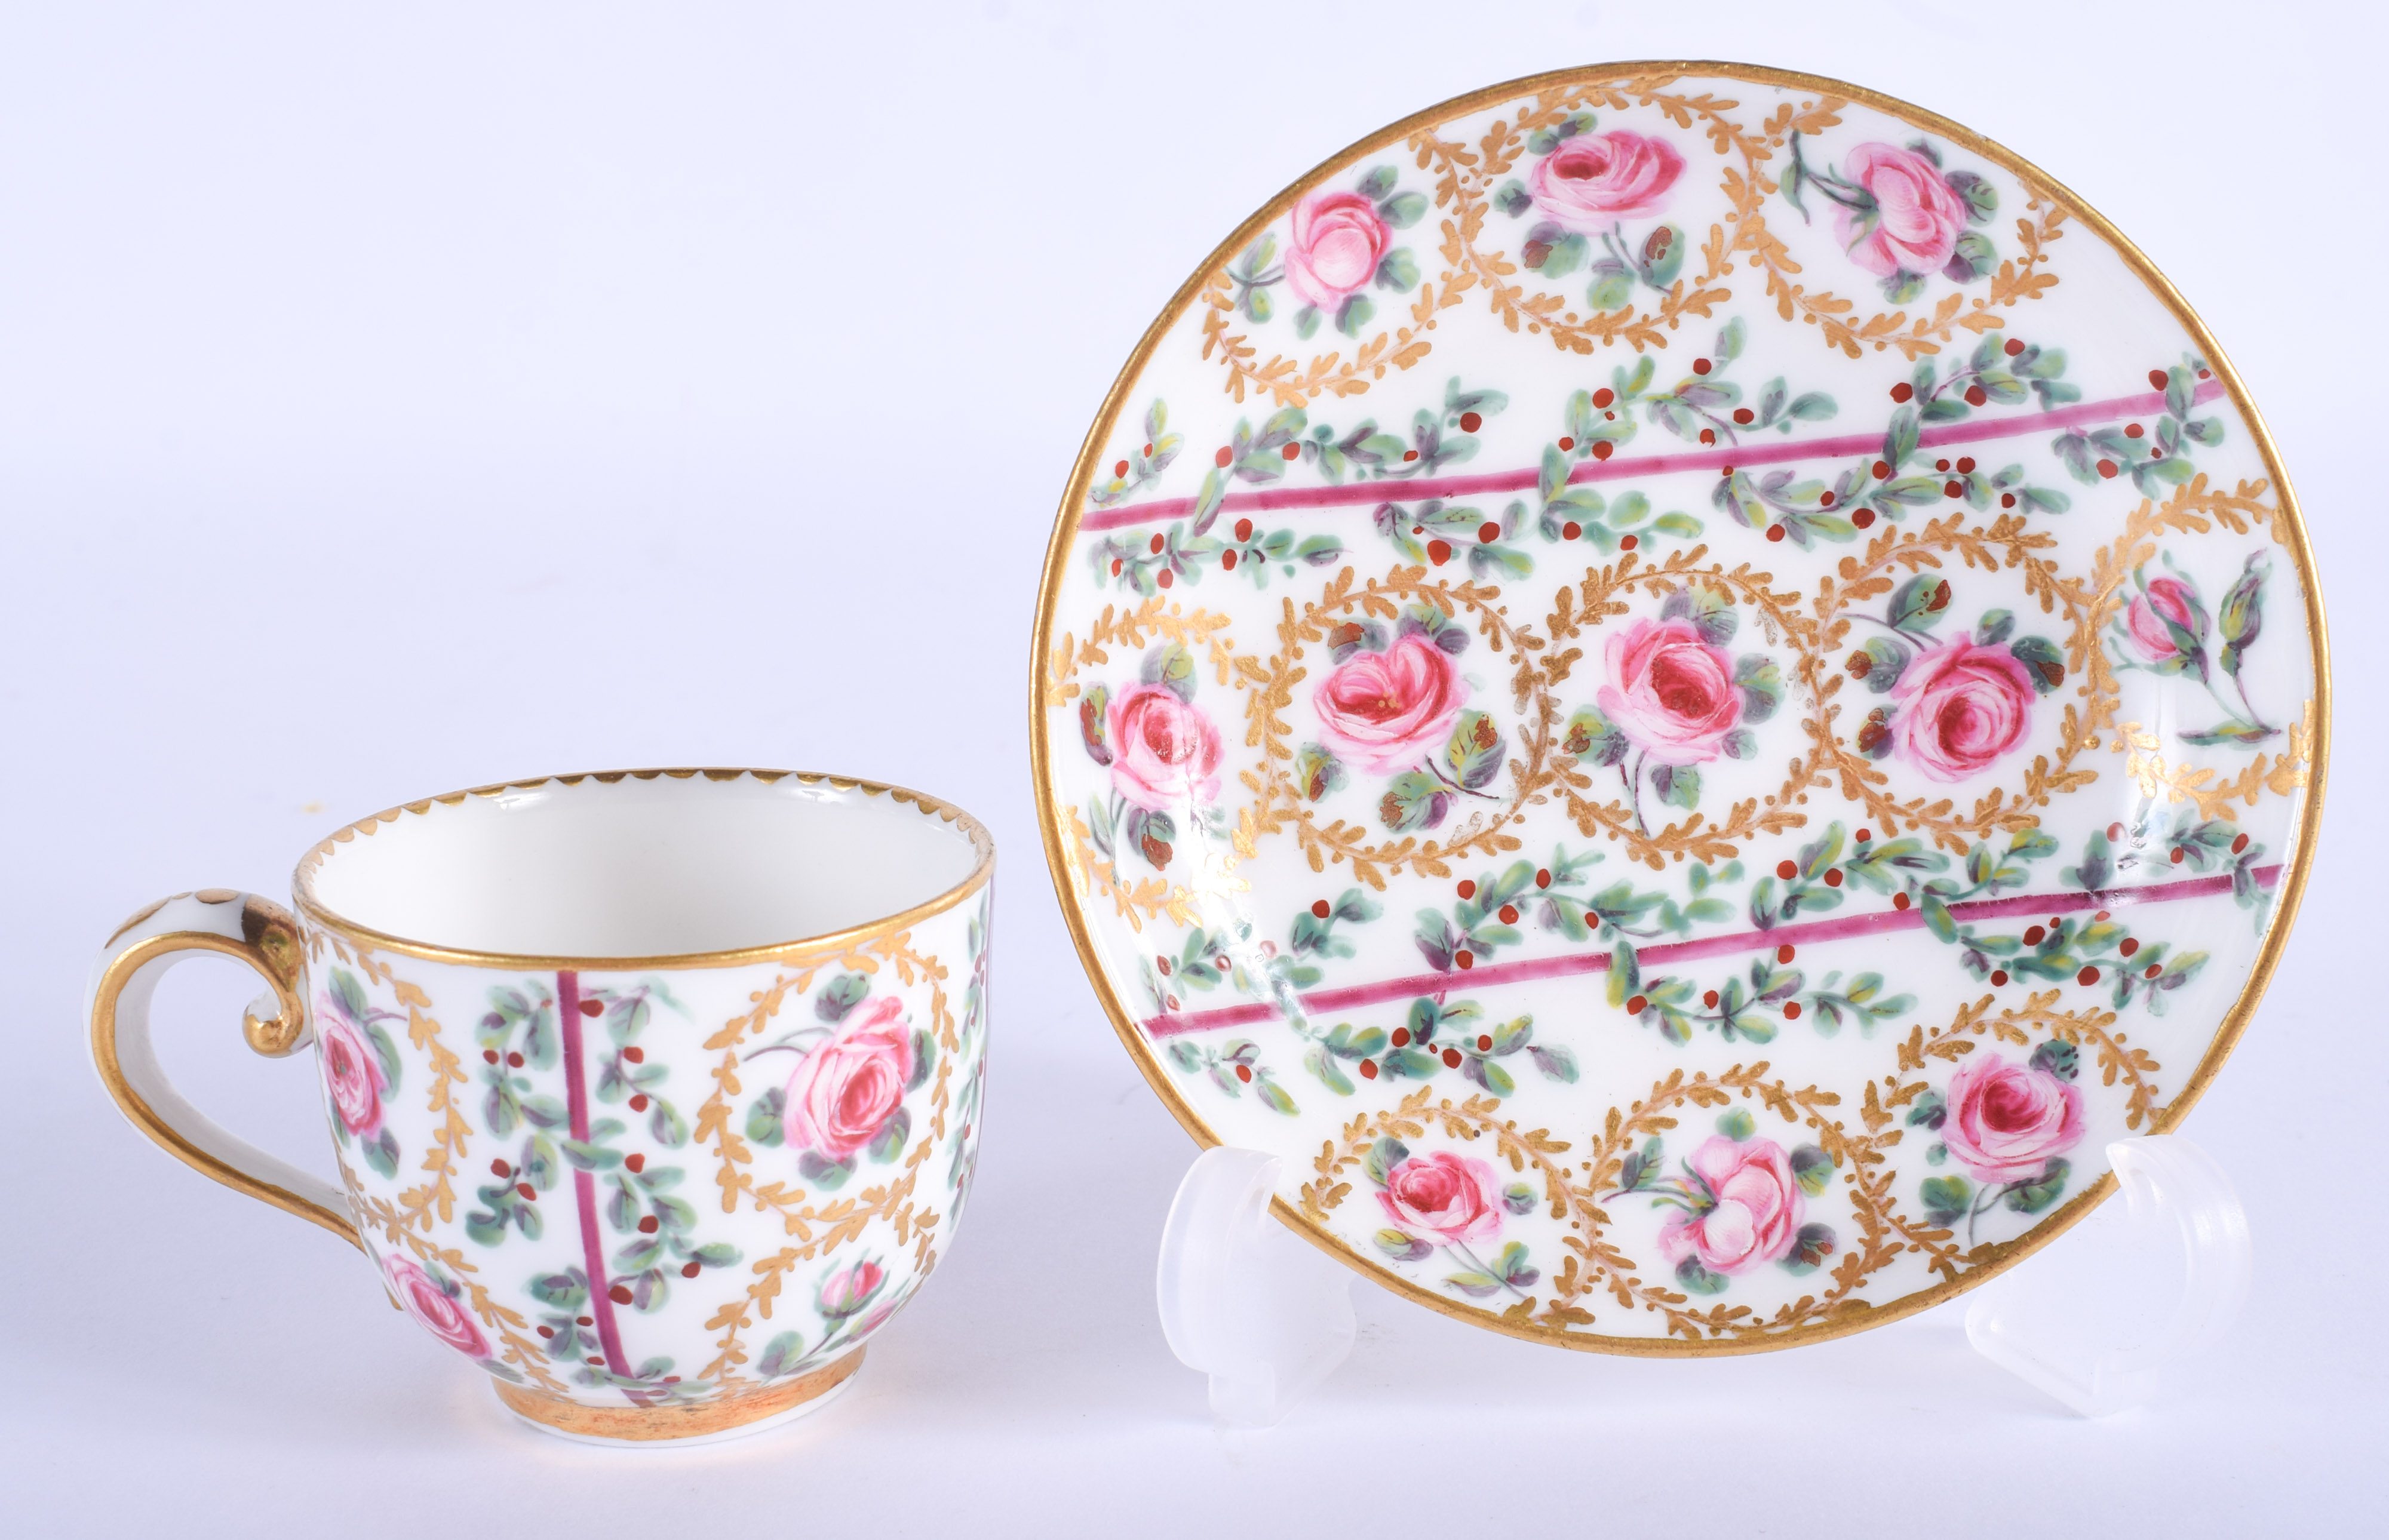 AN 18TH CENTURY SEVRES PORCELAIN CUP AND SAUCER painted with roses and gilt vines. (2)